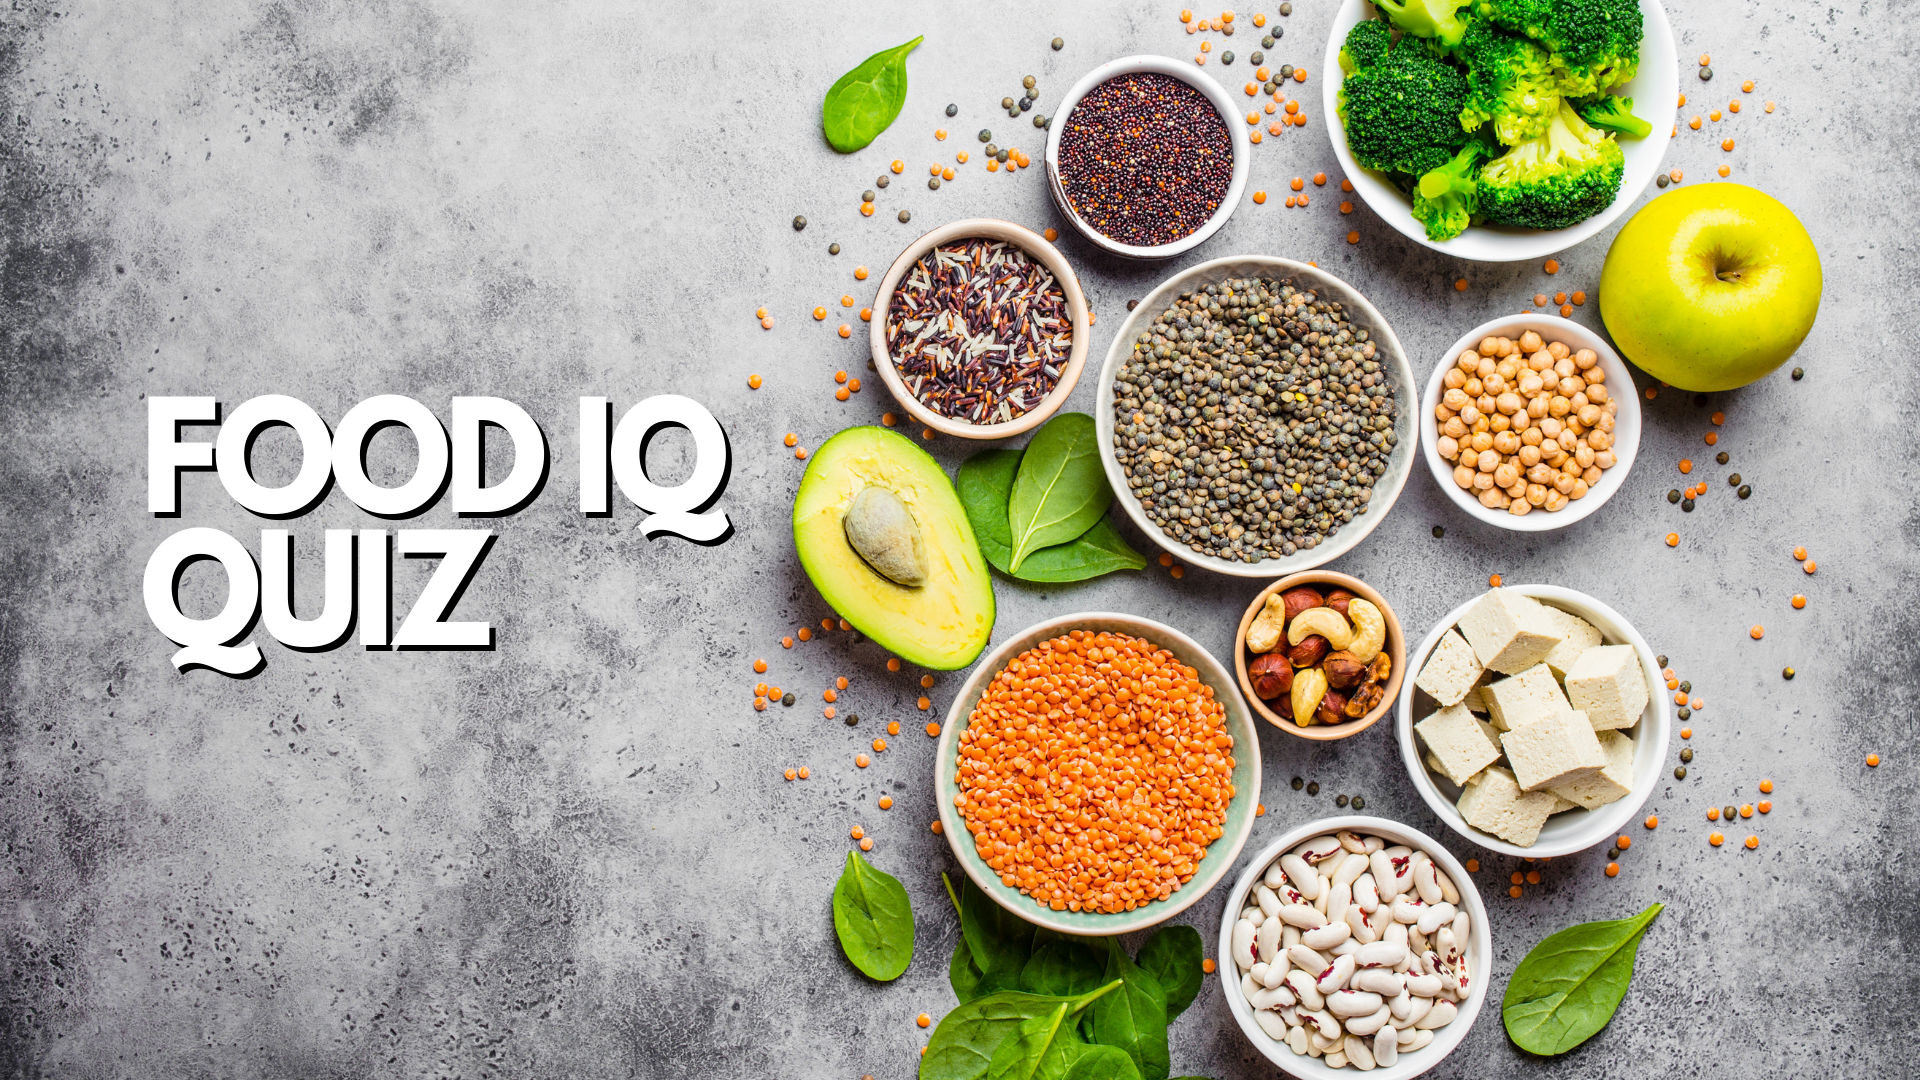 What's Your Food IQ? Try Our Simple Quiz!